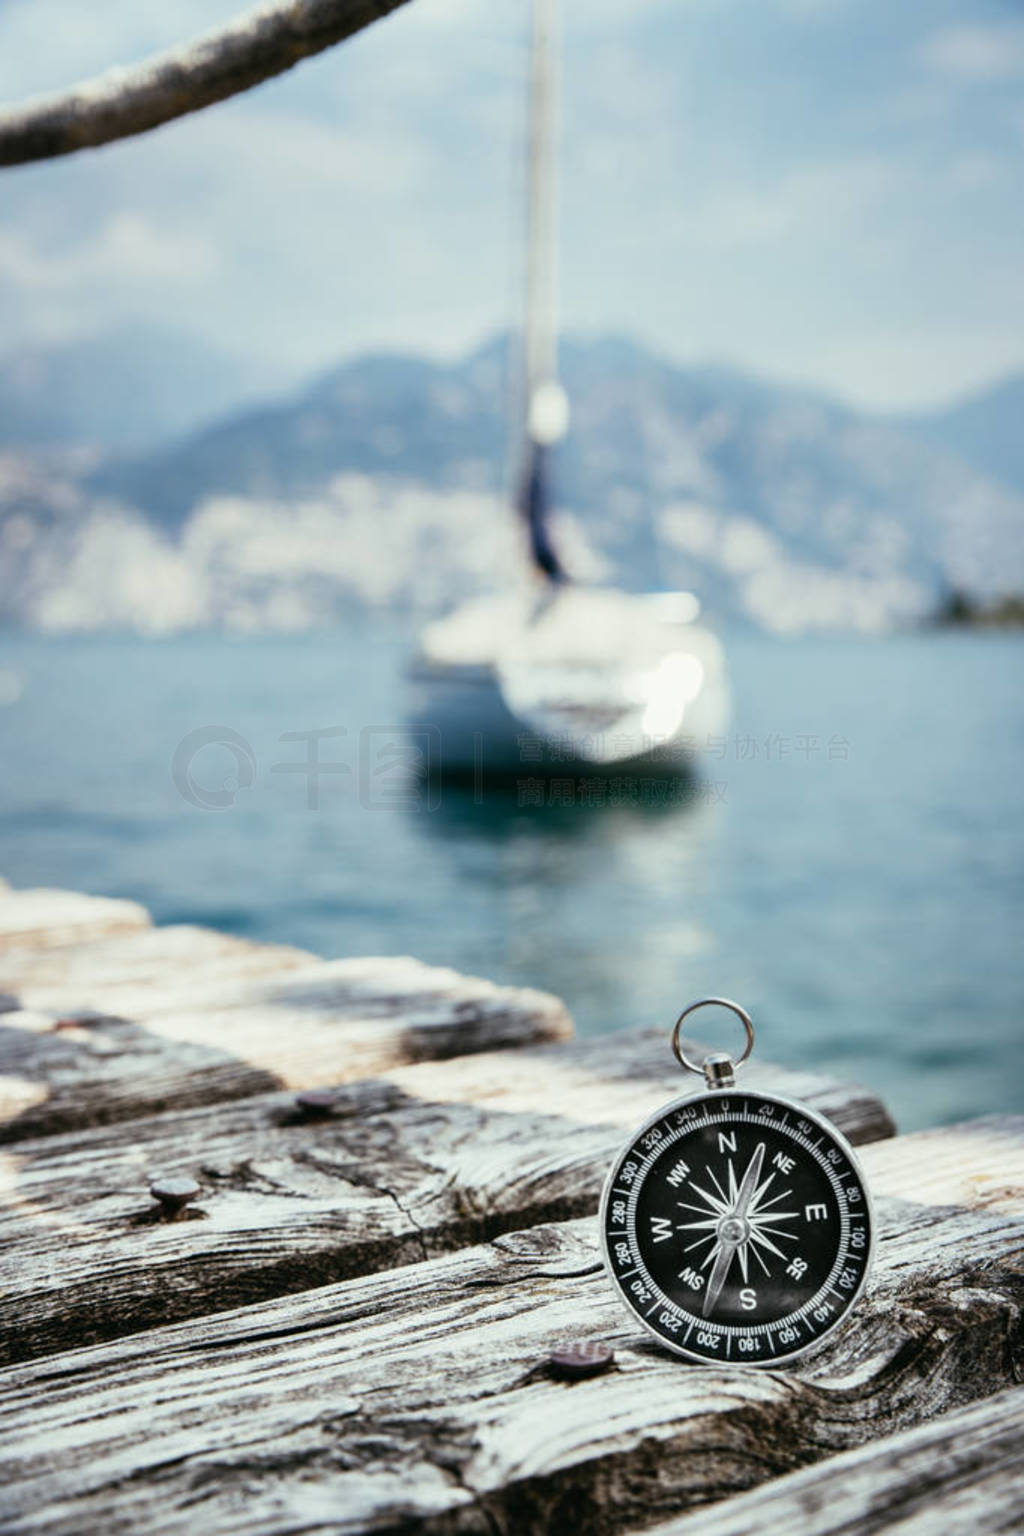 Sailing: nautical compass on wooden dock pier. Sailing boats in